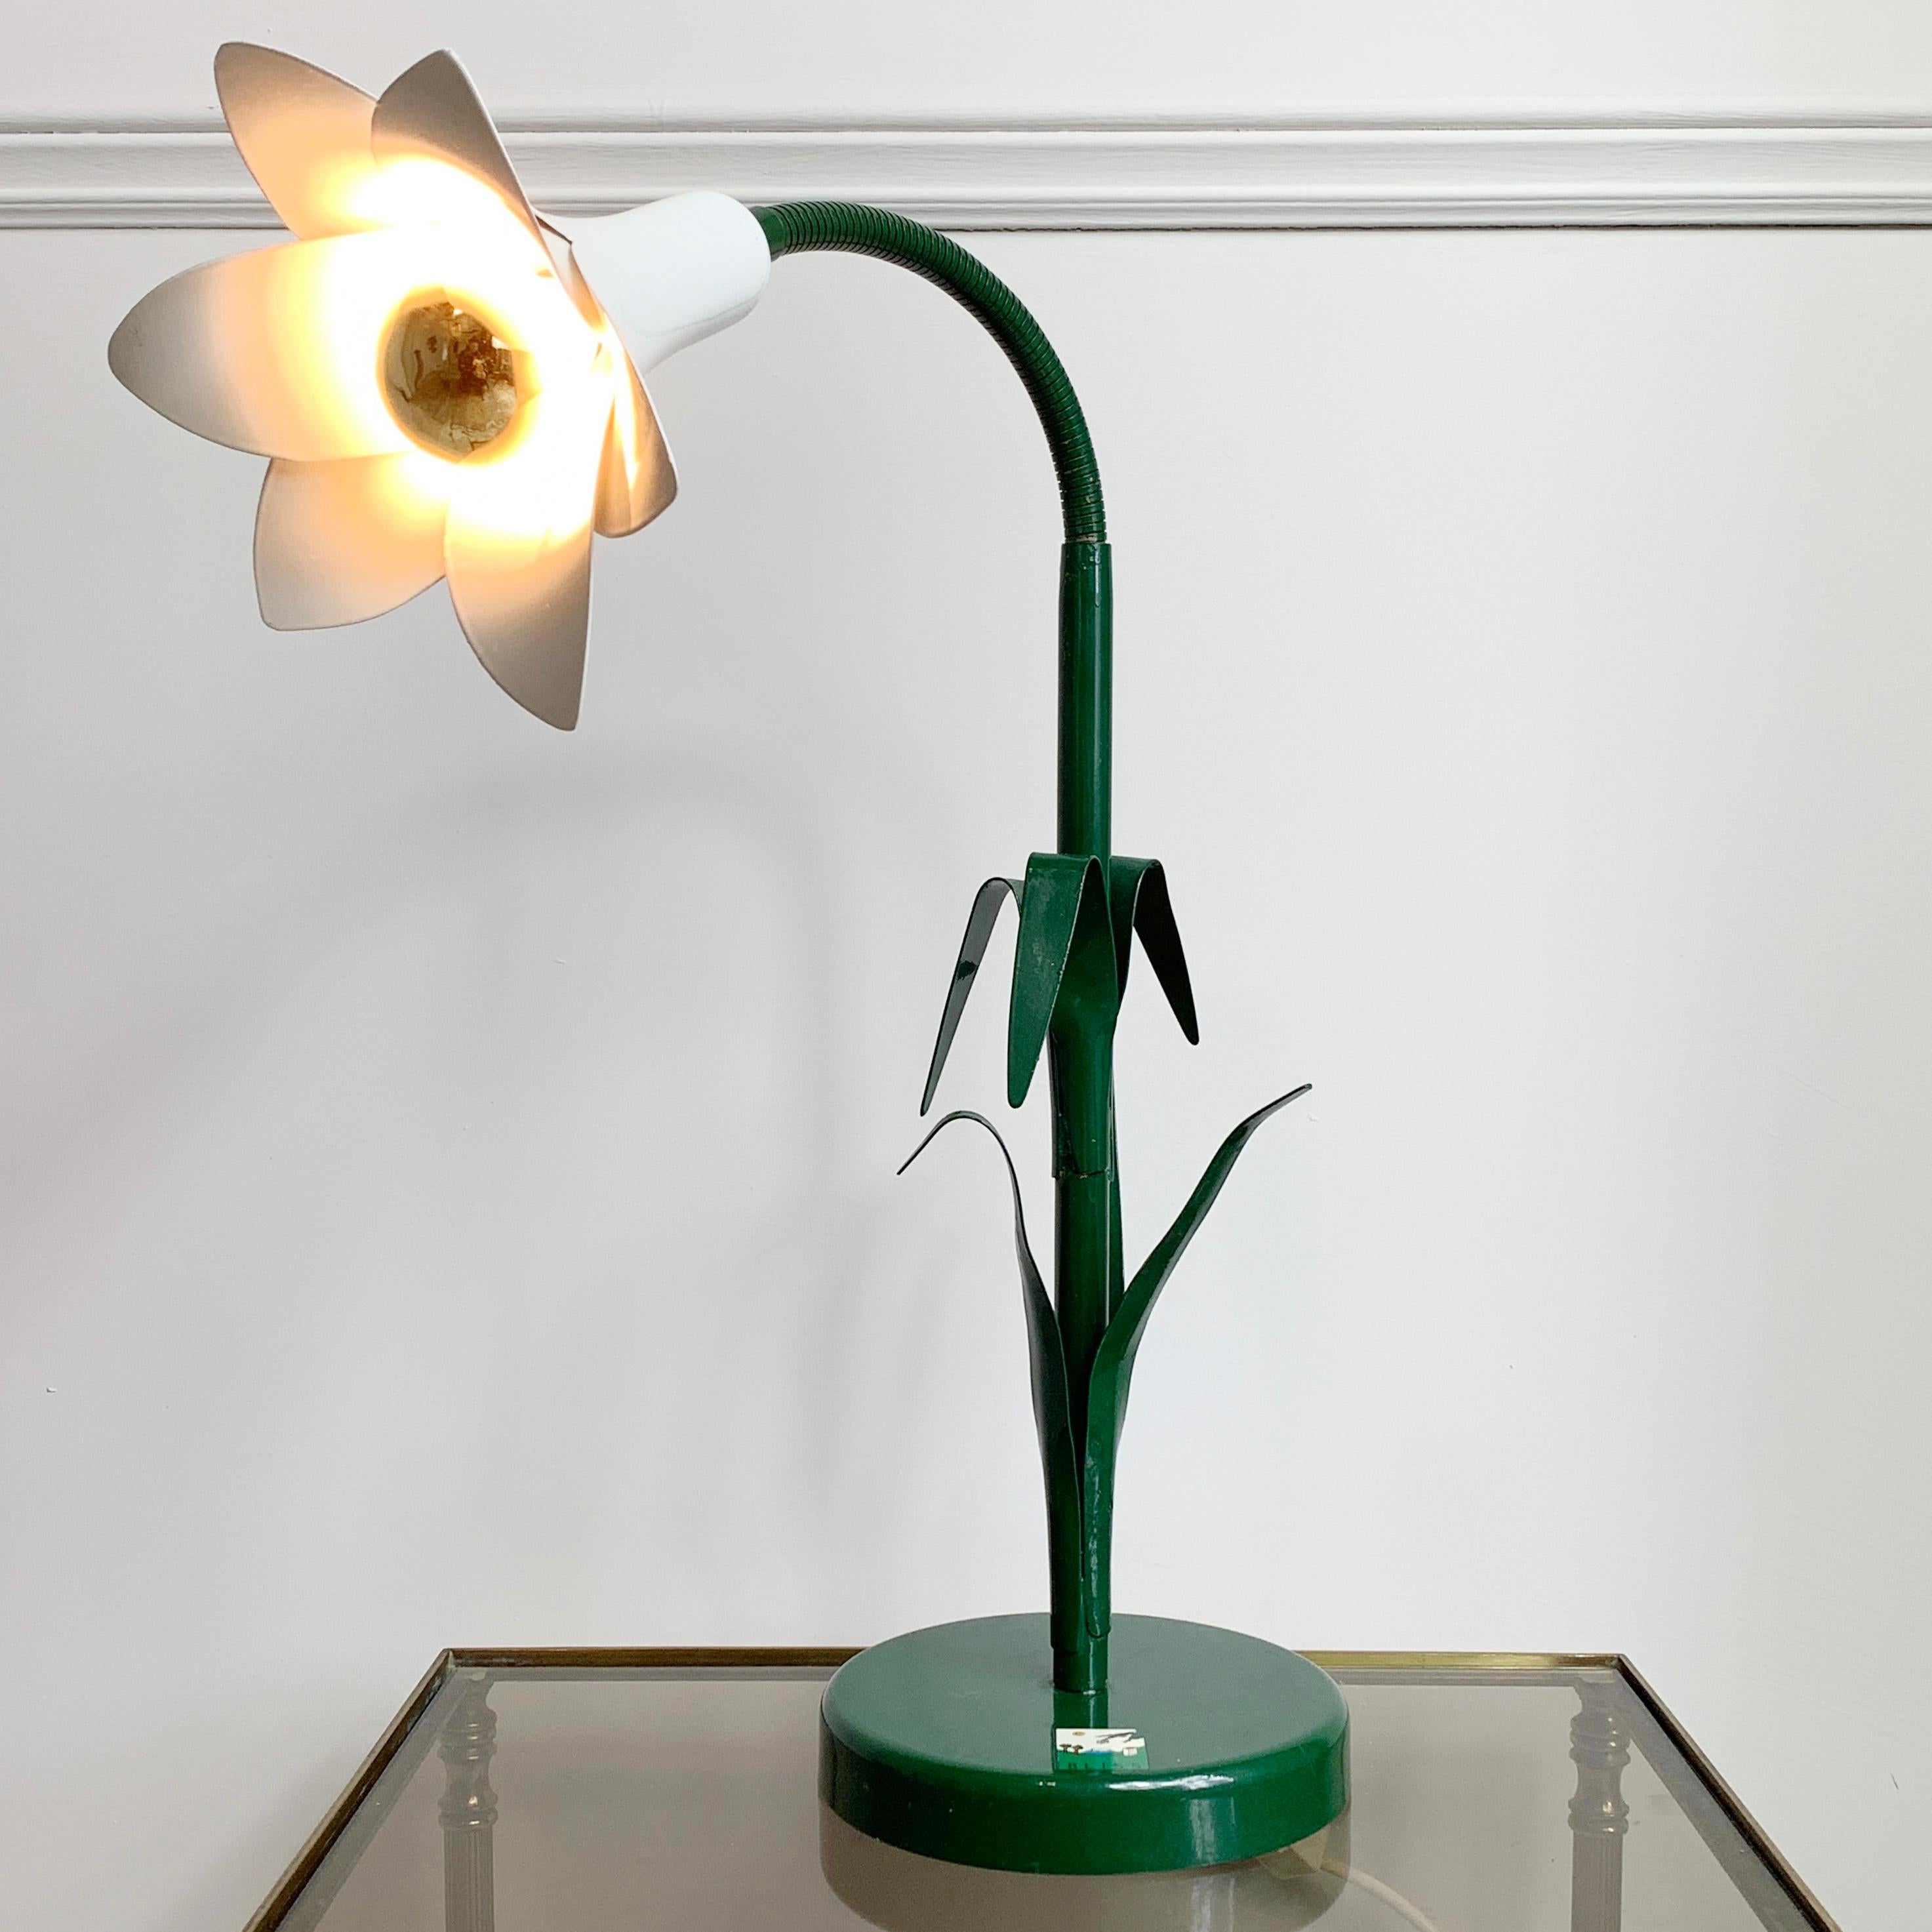 'Bliss' designer white lily table lamp
metal tulip shaped lamp, designed in the UK by bliss in the 1980's
this example is in fantastic condition
53cm height (as shown in photograph) 67cm height with tulip head pointing straight up, 15cm width of